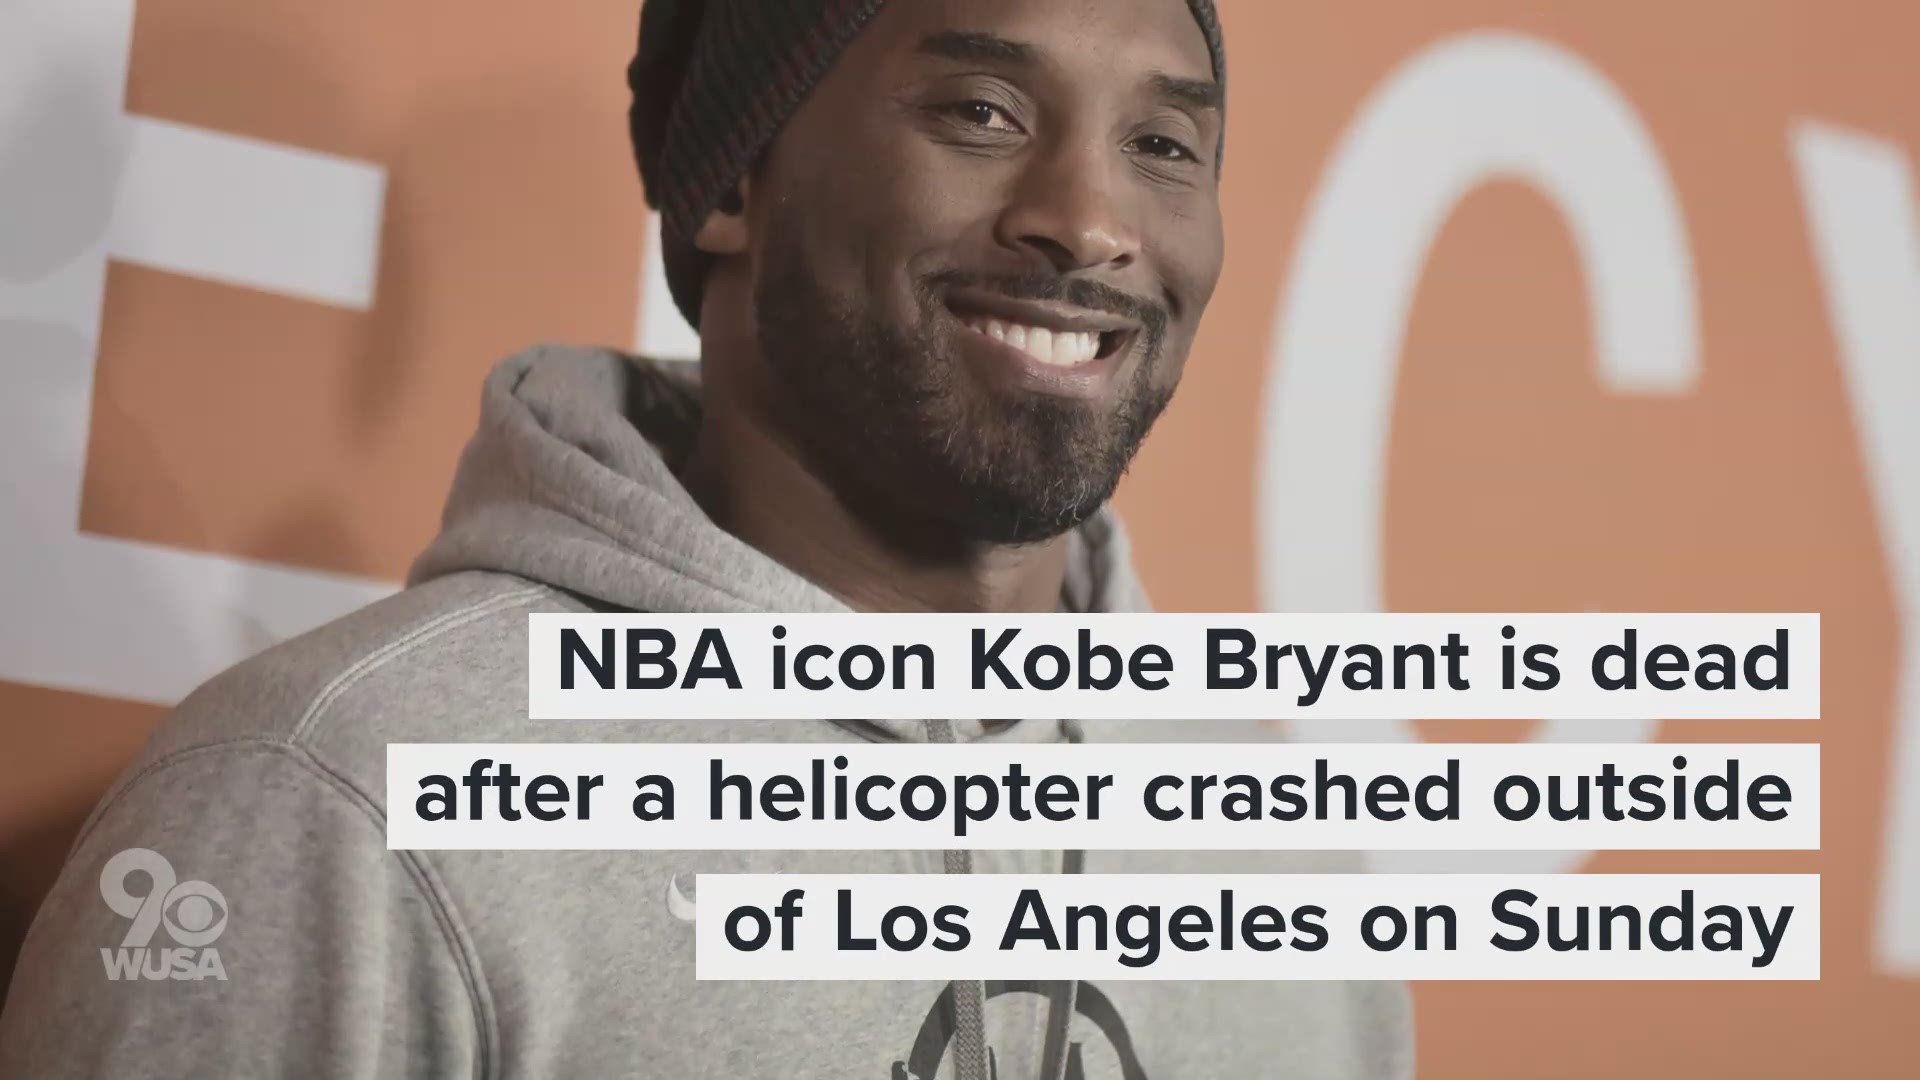 The 41-year-old NBA Icon died in a helicopter crash on Sunday alongside his 13-year-old daughter. Here is a look at his legacy.